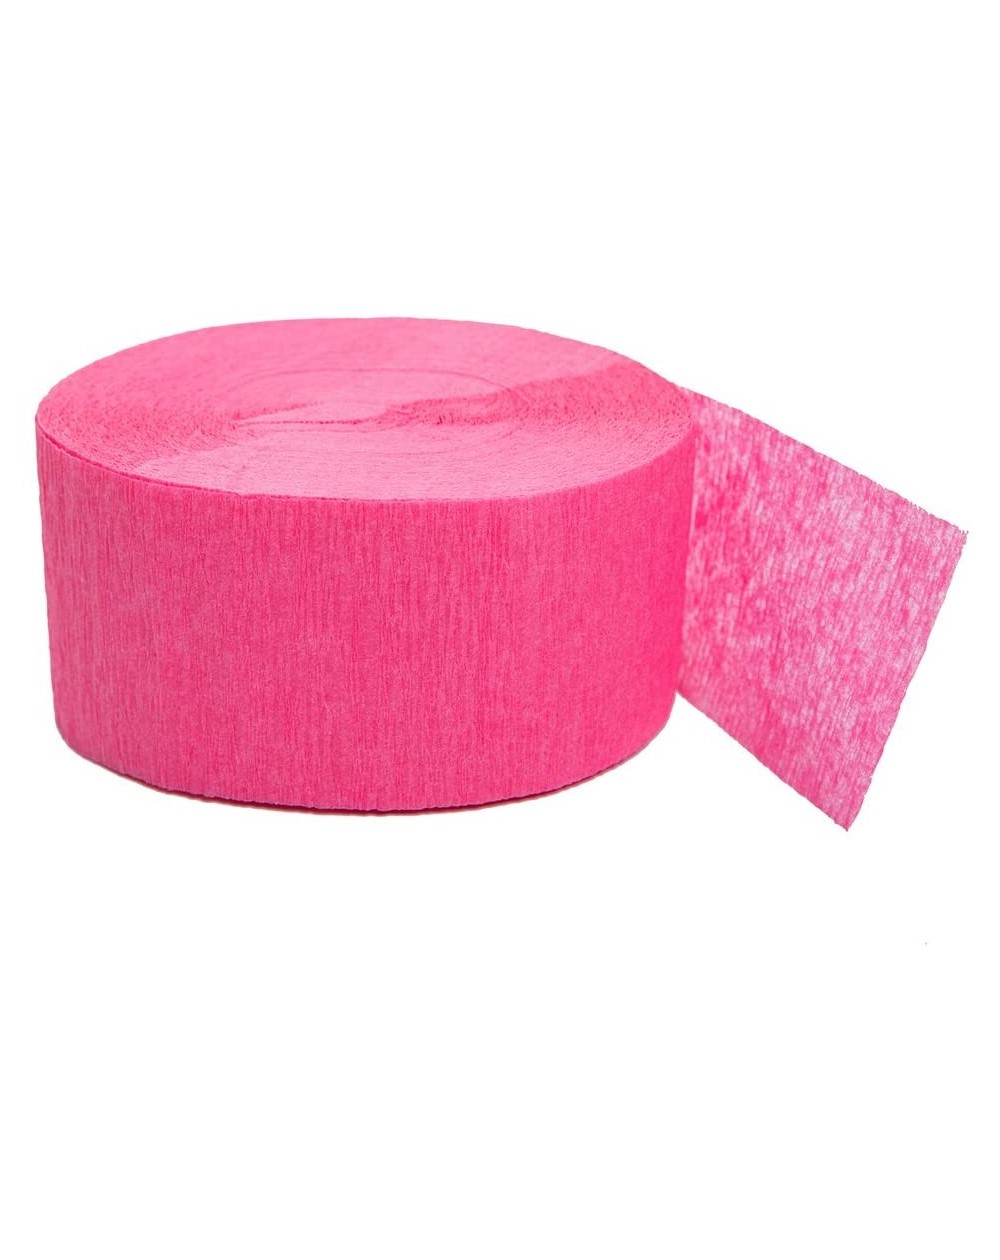 Streamers party decoration- 81ft- Bright Pink - Bright Pink - CH12O42RK4N $9.49